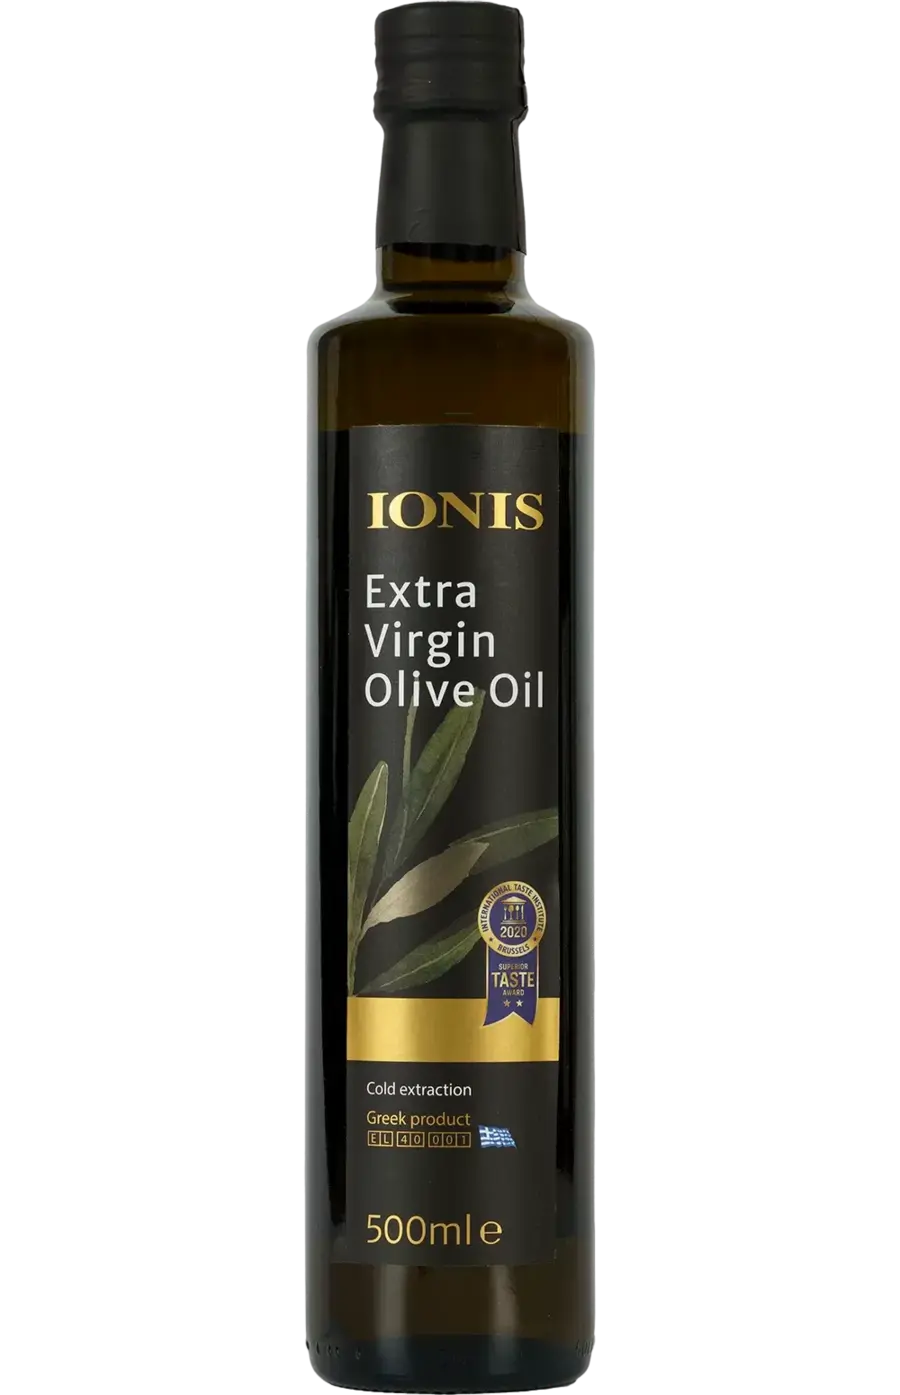 IONIS EXTRA VIRGIN OLIVE OIL